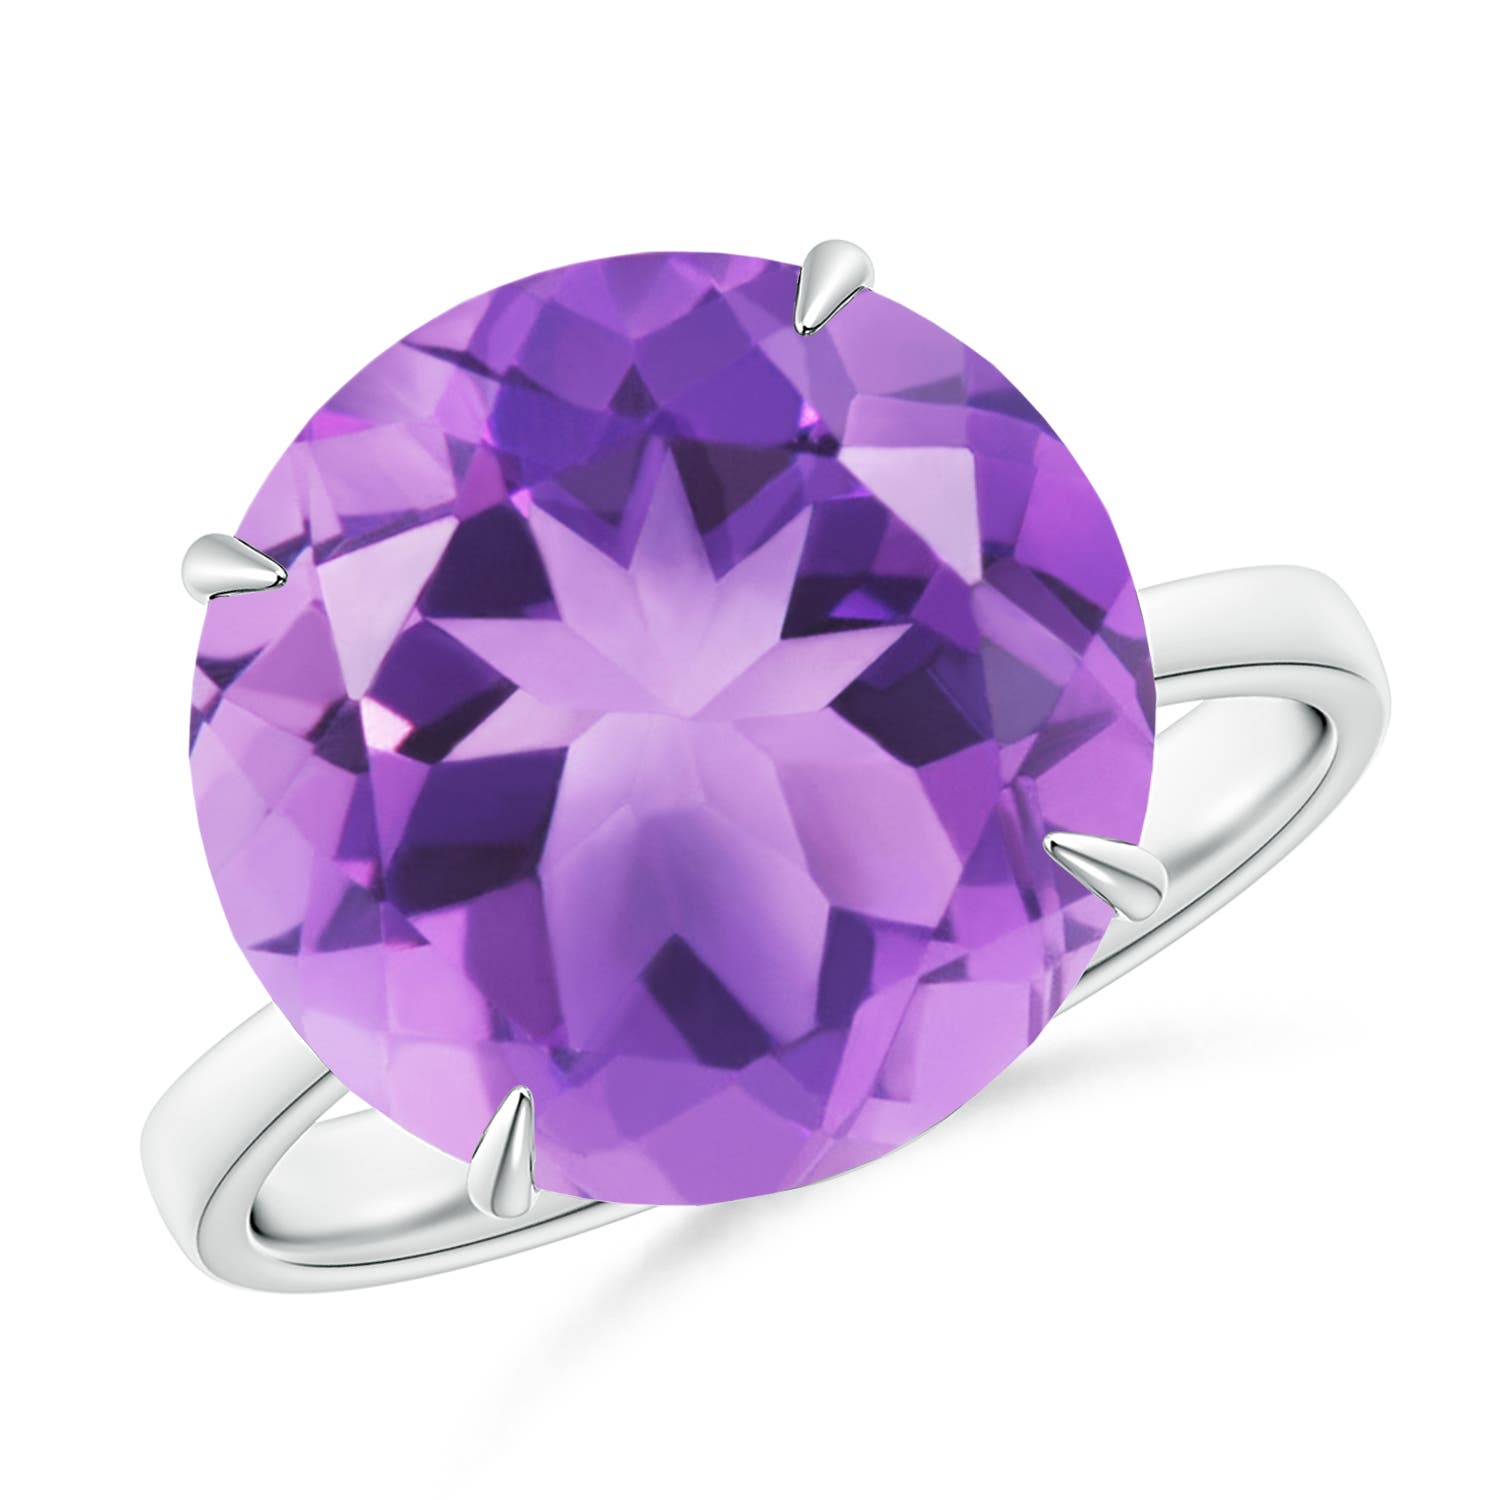 A - Amethyst / 7.2 CT / 14 KT White Gold